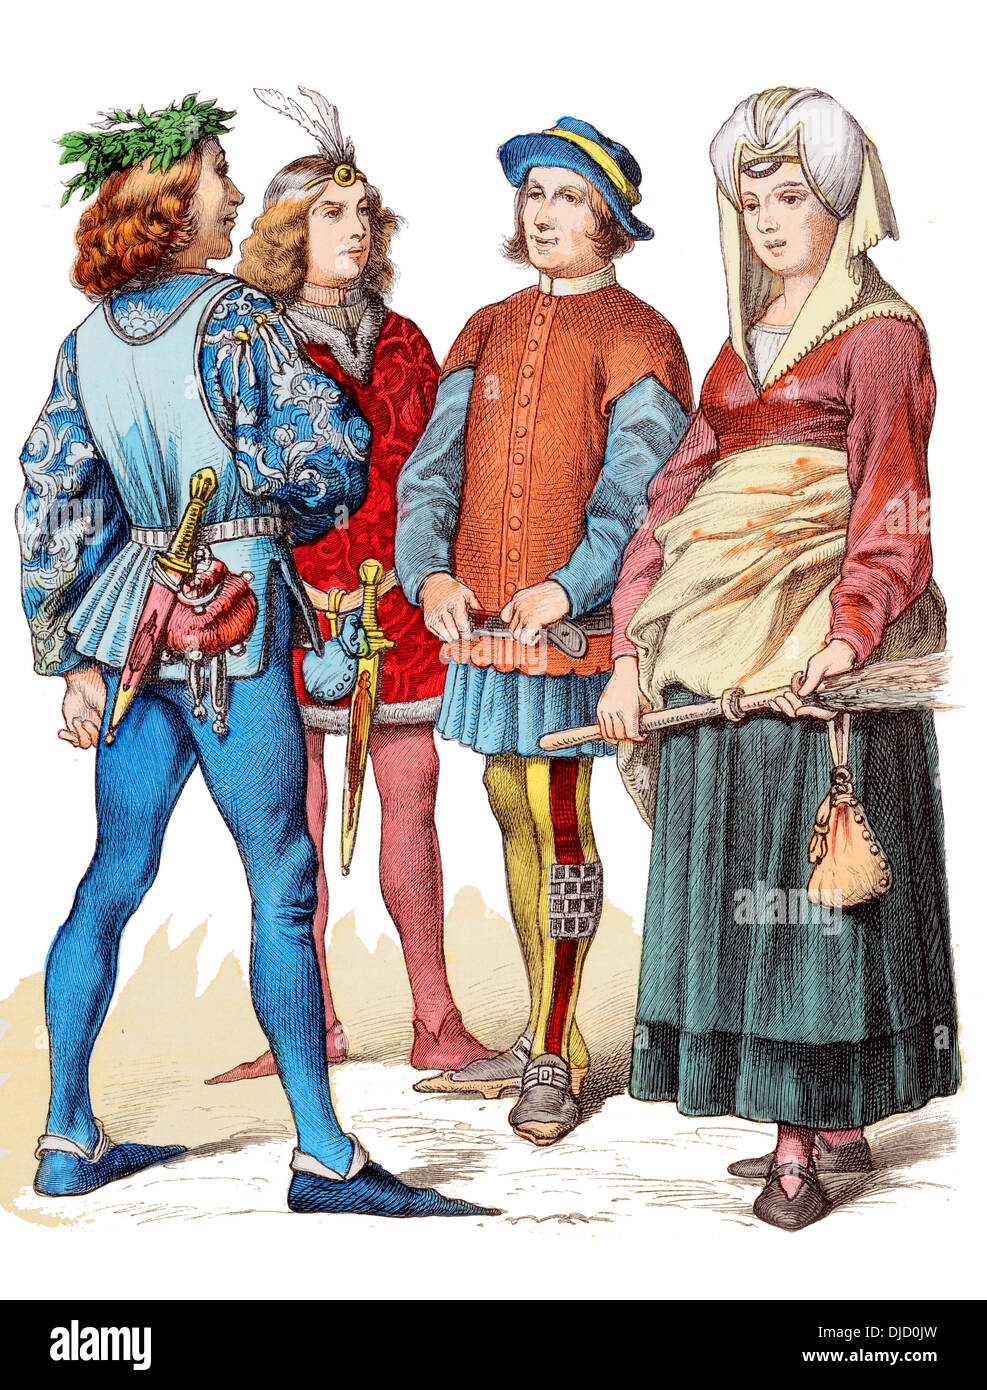 Mid 15th Century XV 1400s Costumes of French citizens Stock Photo ...